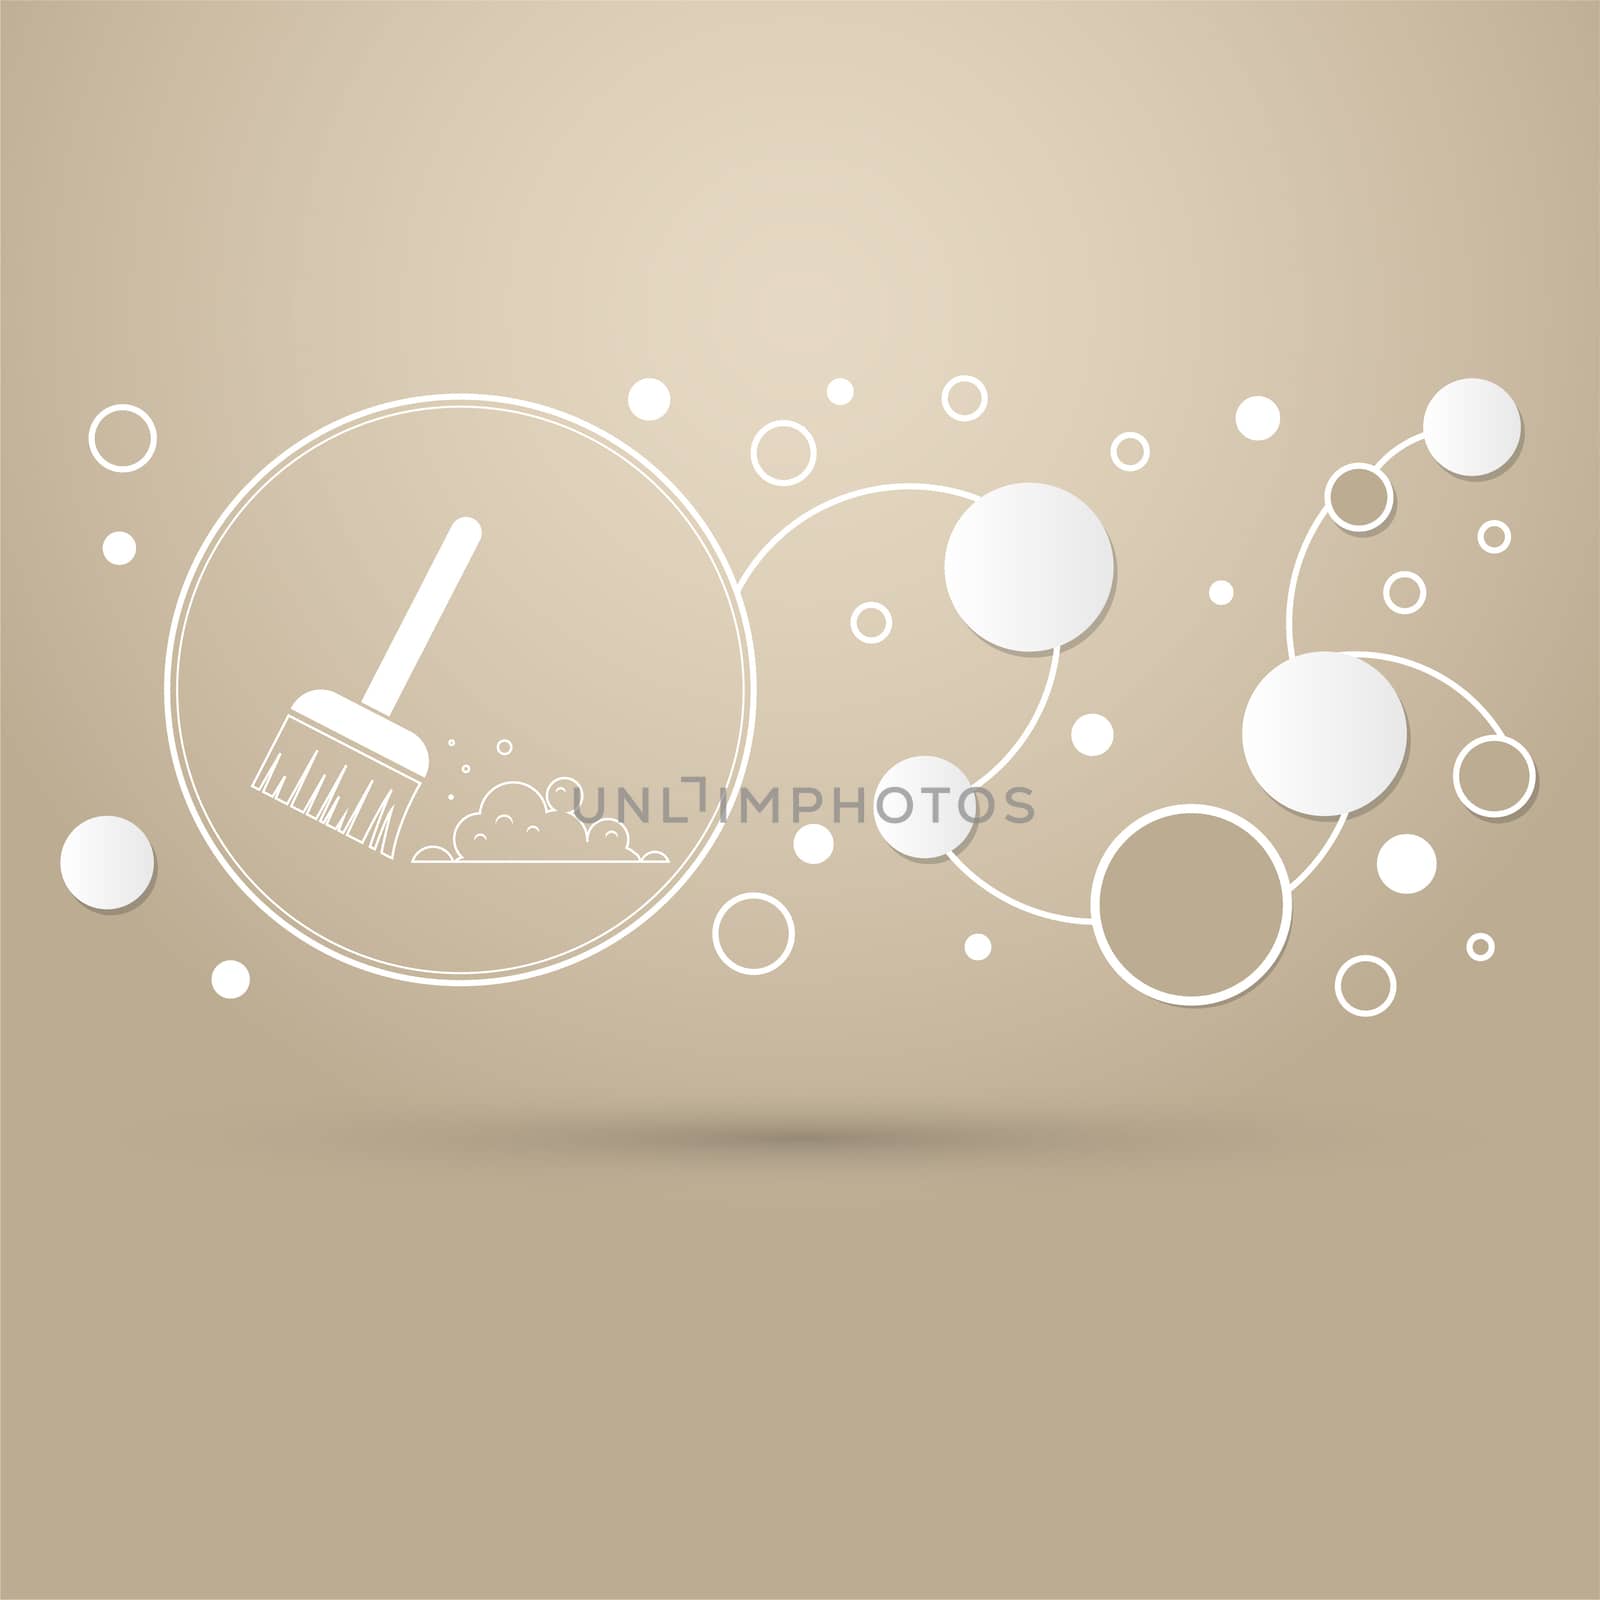 Broom icon on a brown background with elegant style and modern design infographic.  by Adamchuk